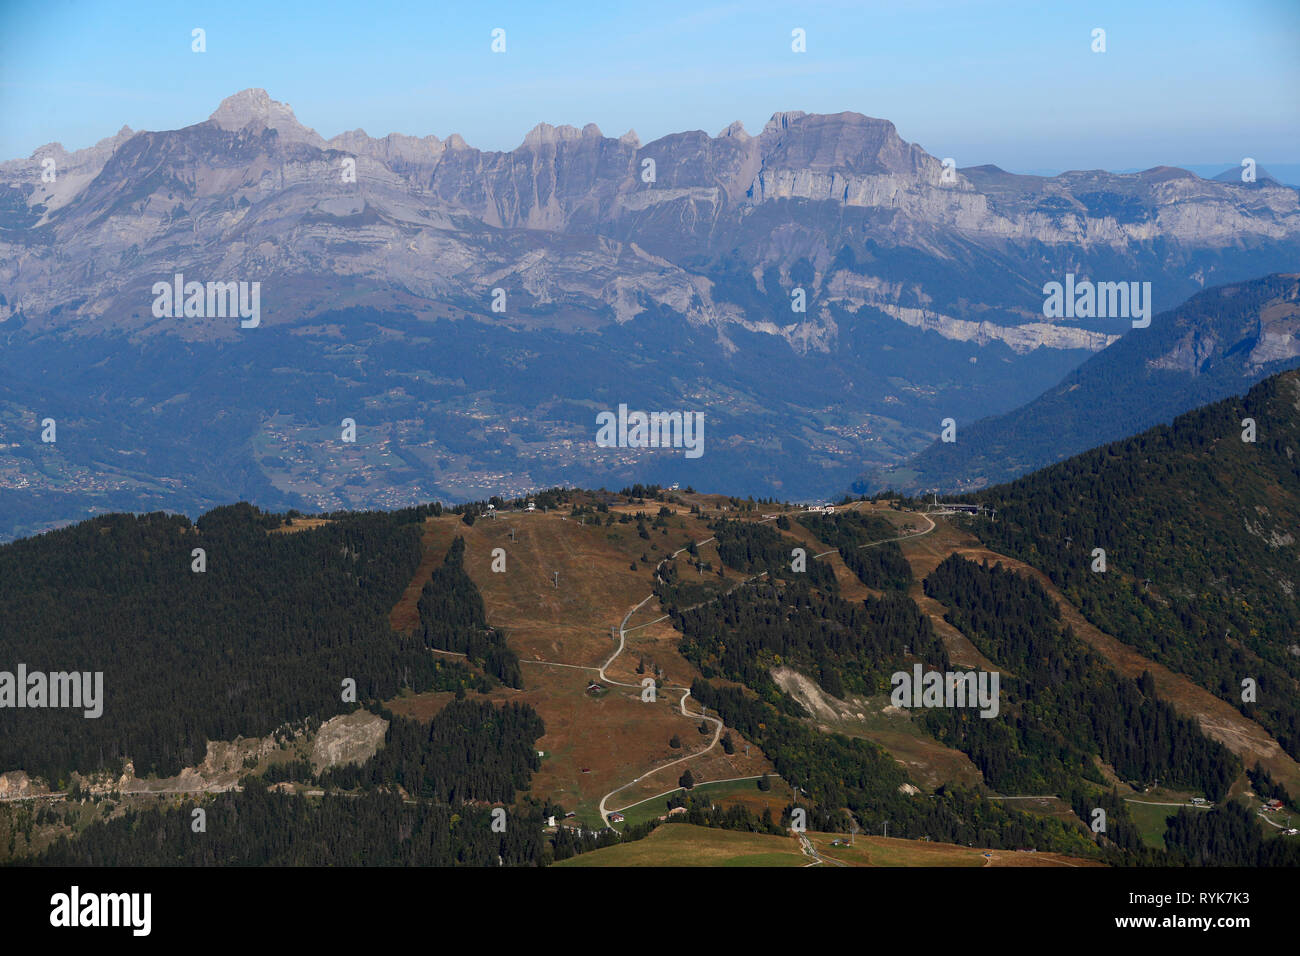 Landscape of the French Alps in summer. Aravis and Fiz mountains.  France. Stock Photo